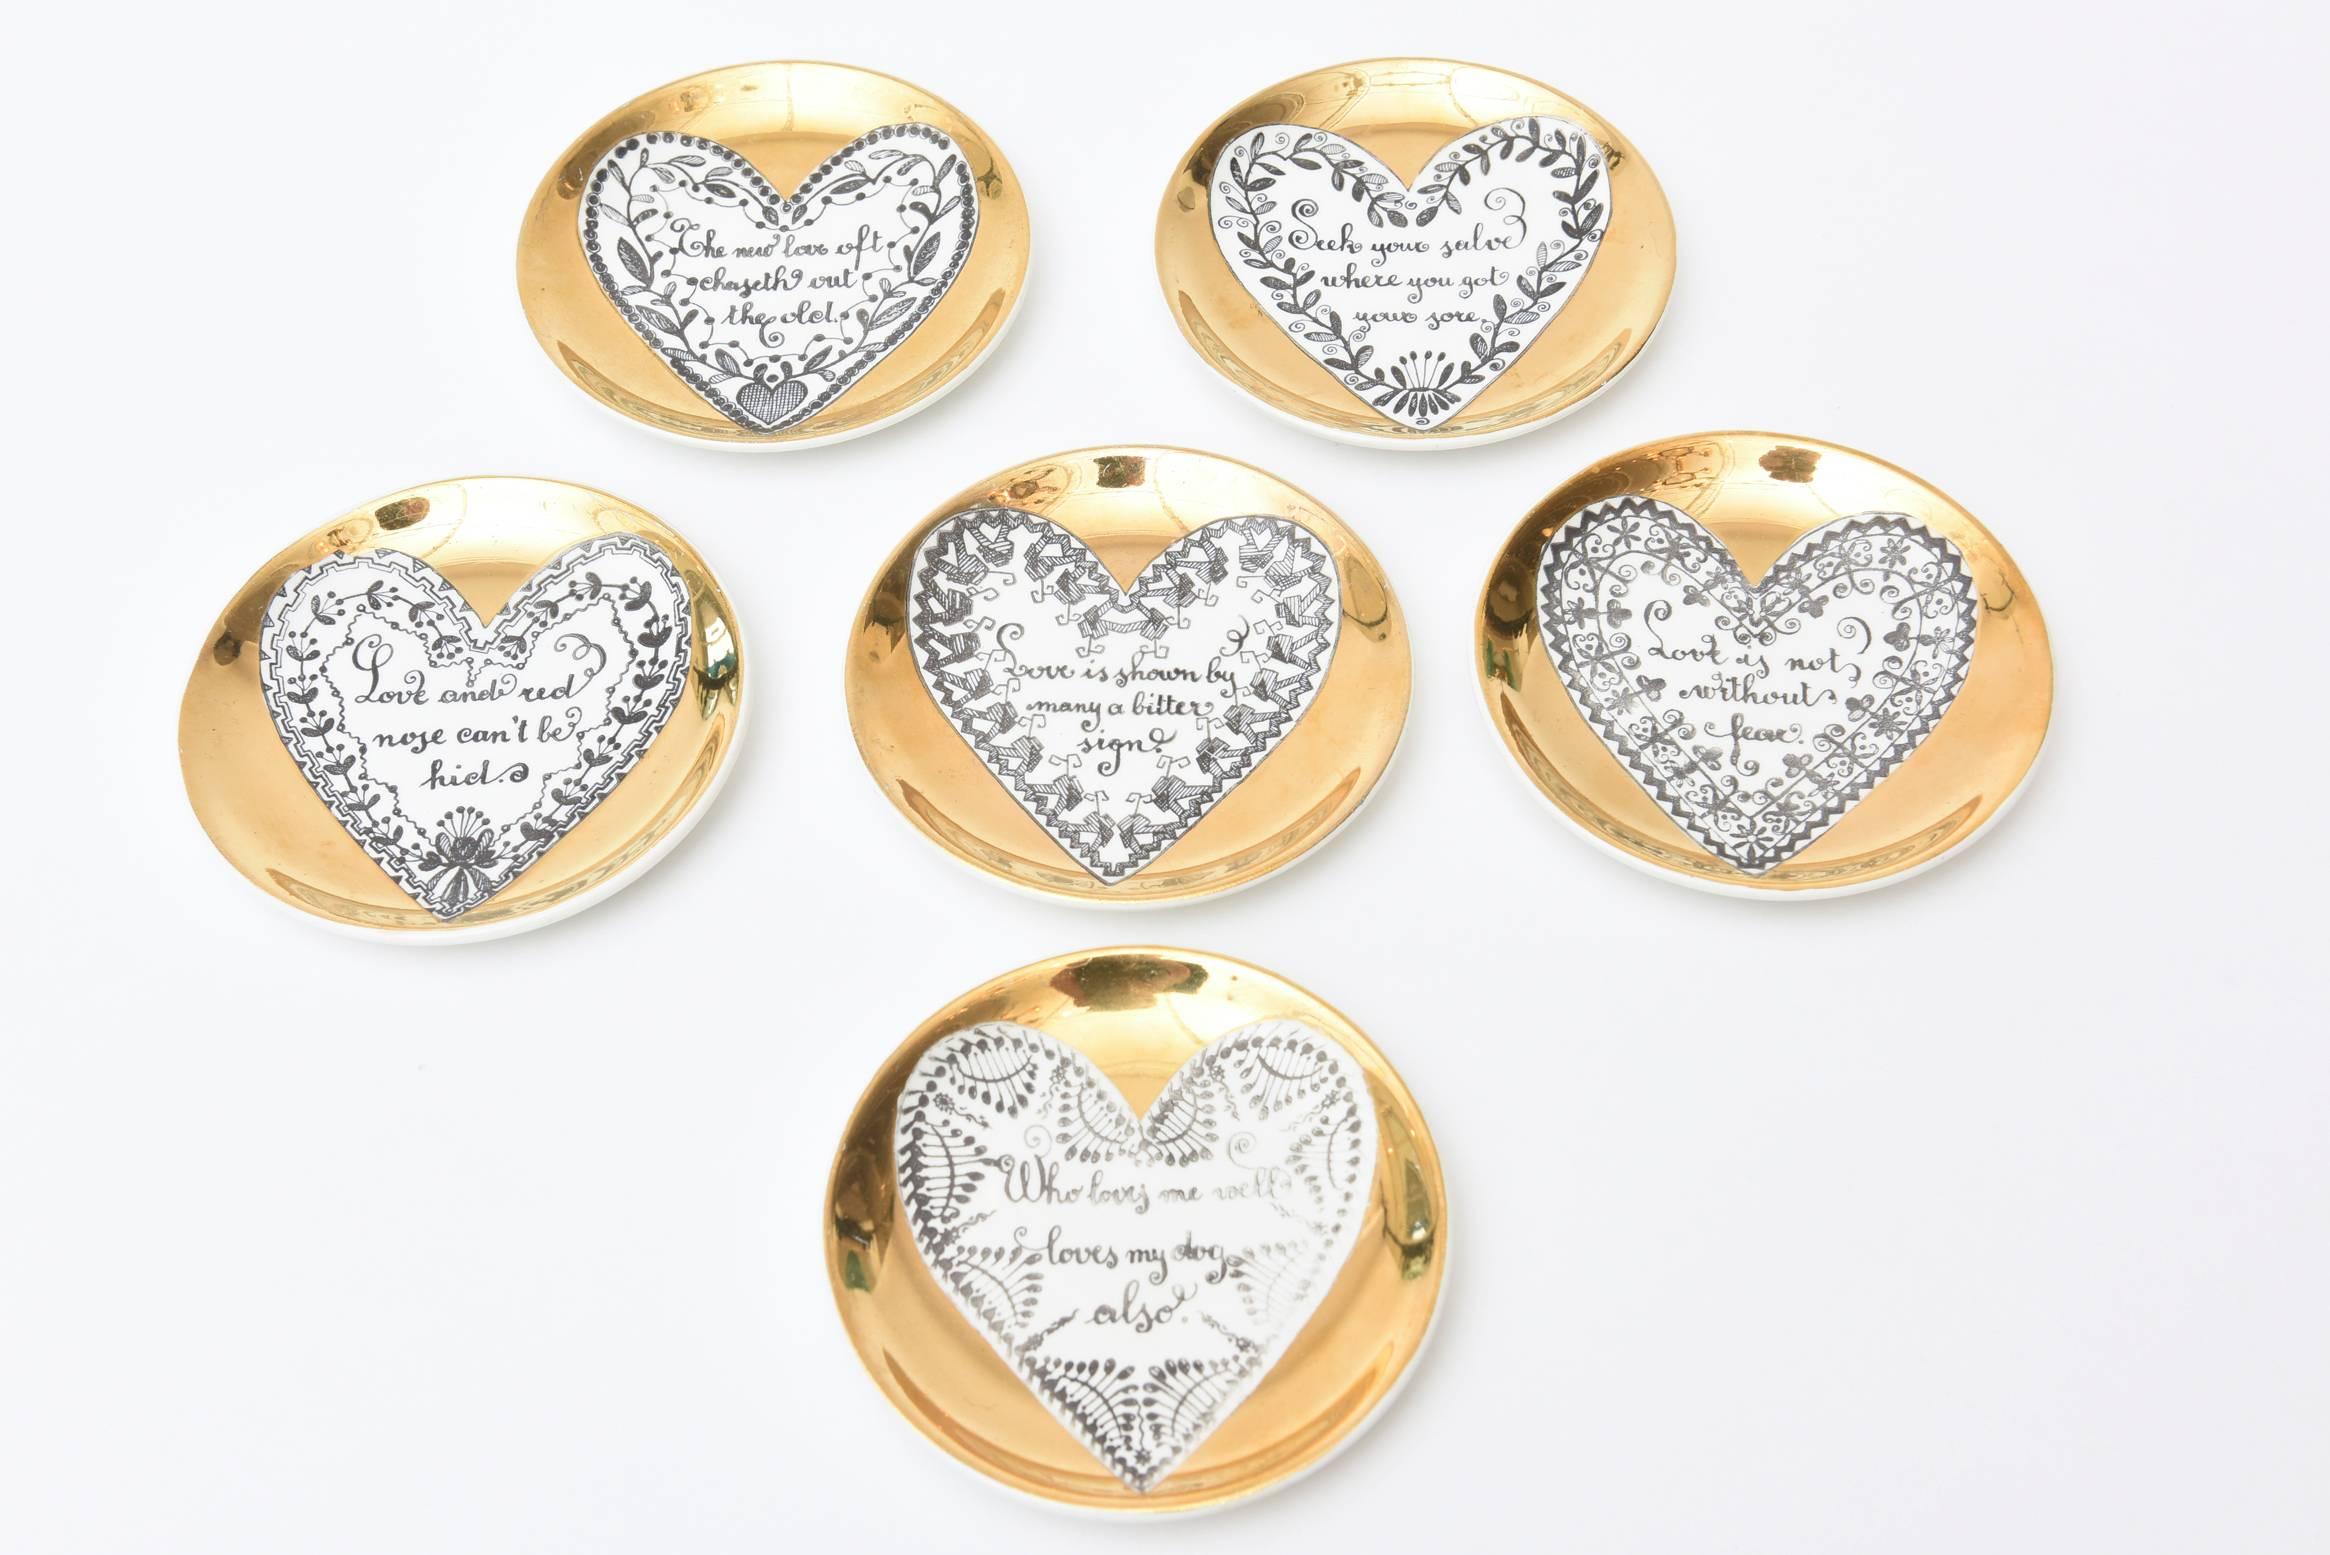 These delightful and romantic verbages are depicted within the heart shape of these hallmarked Piero Fornasetti gilded porcelain love coasters/ small plates/barware.
They are lithographically printed and are the only works that Fornasetti